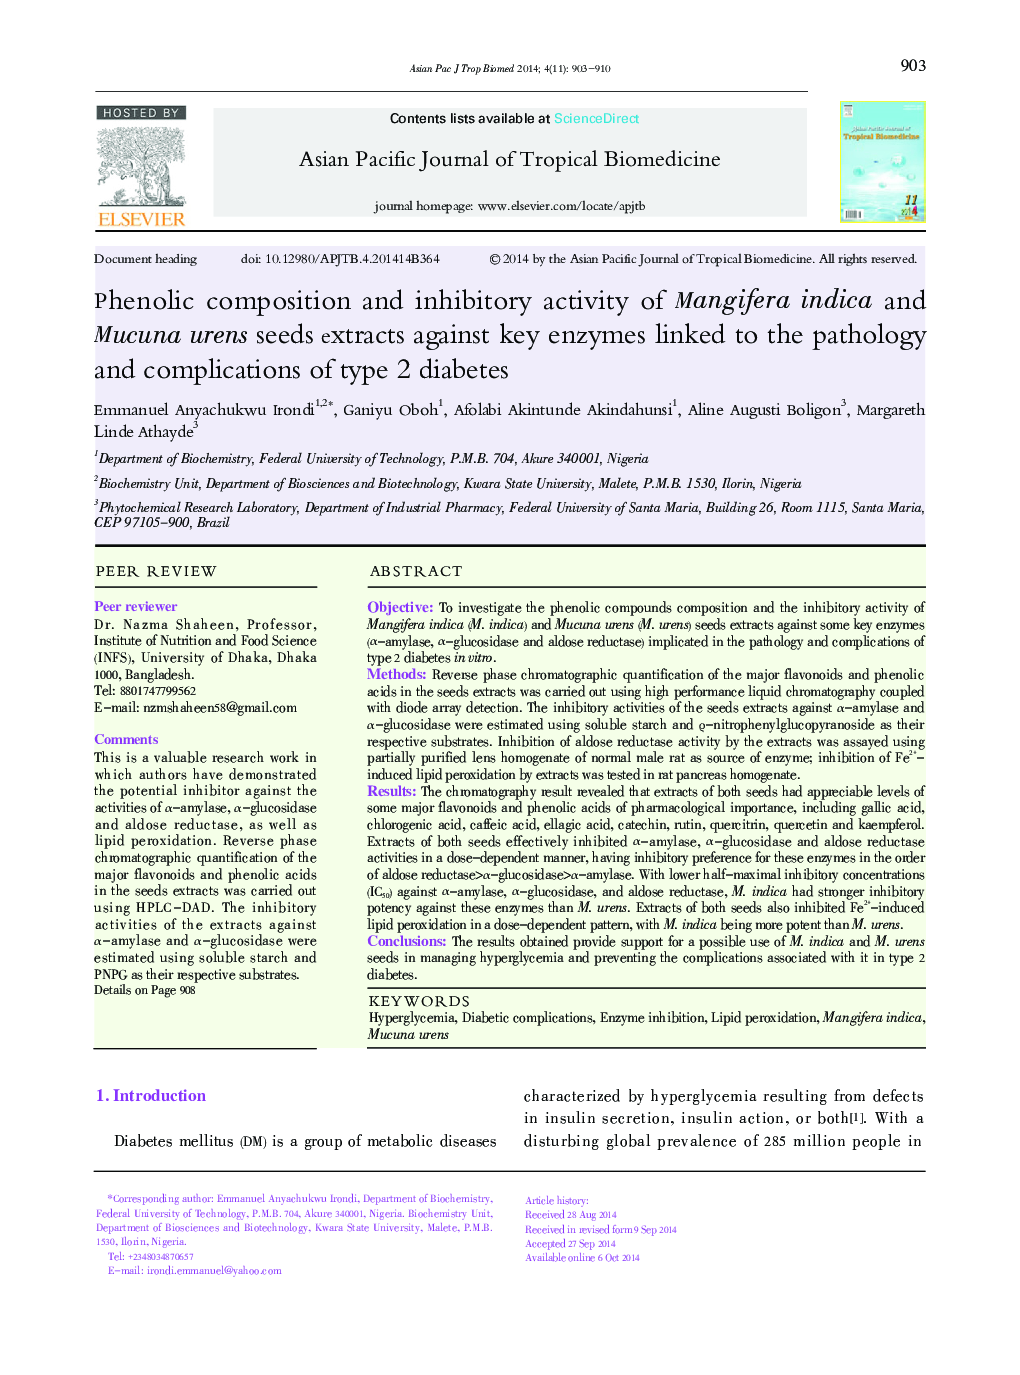 Phenolic composition and inhibitory activity of Mangifera indica and Mucuna urens seeds extracts against key enzymes linked to the pathology and complications of type 2 diabetes 